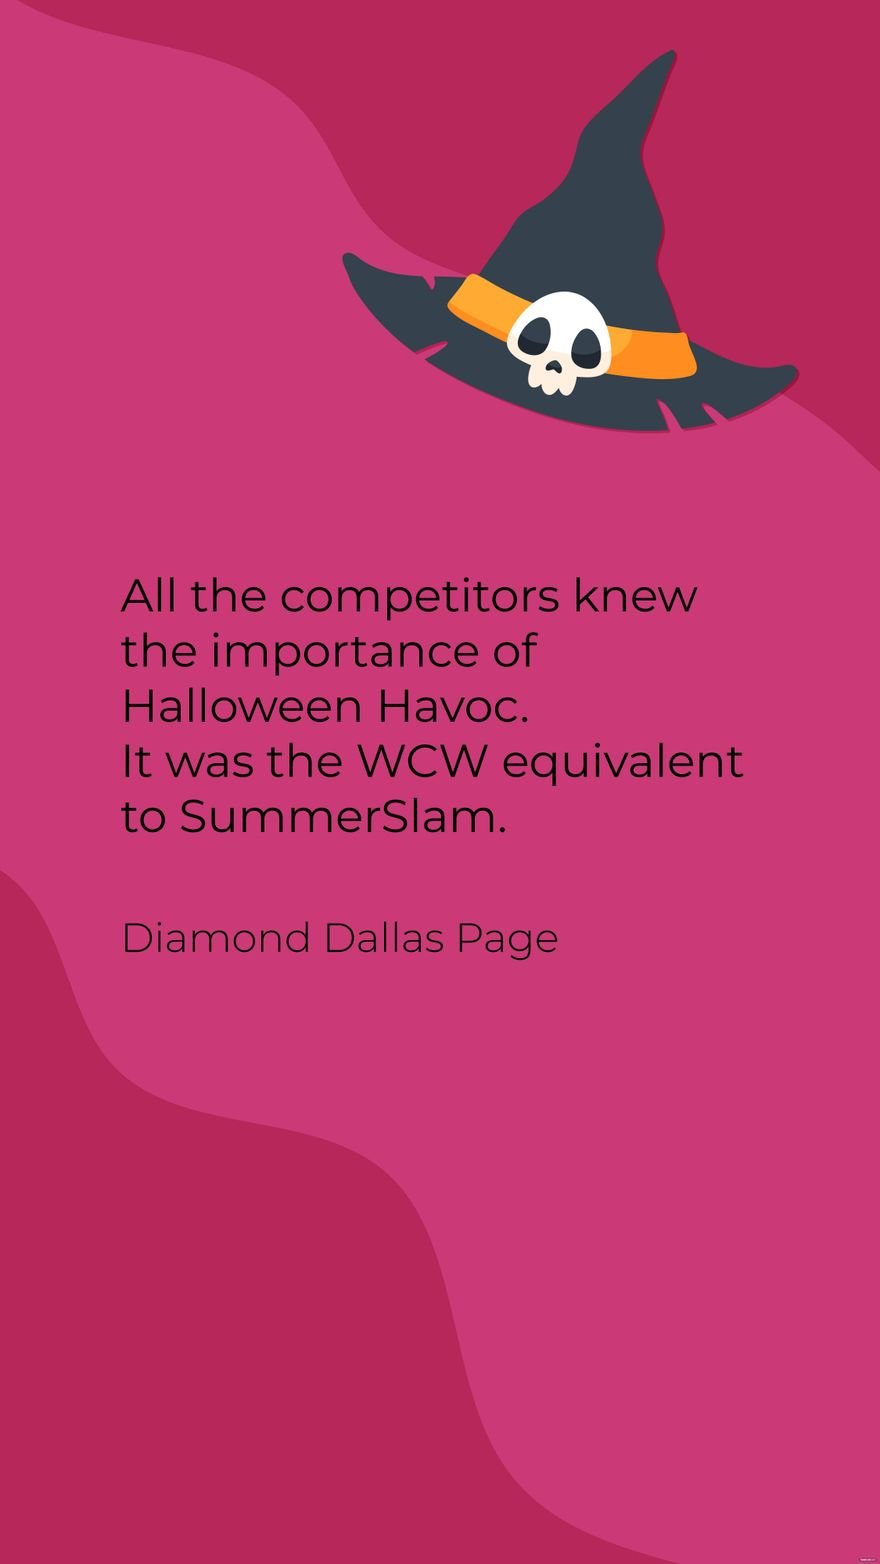 Free Diamond Dallas Page- All the competitors knew the importance of Halloween Havoc. It was the WCW equivalent to SummerSlam. in JPG